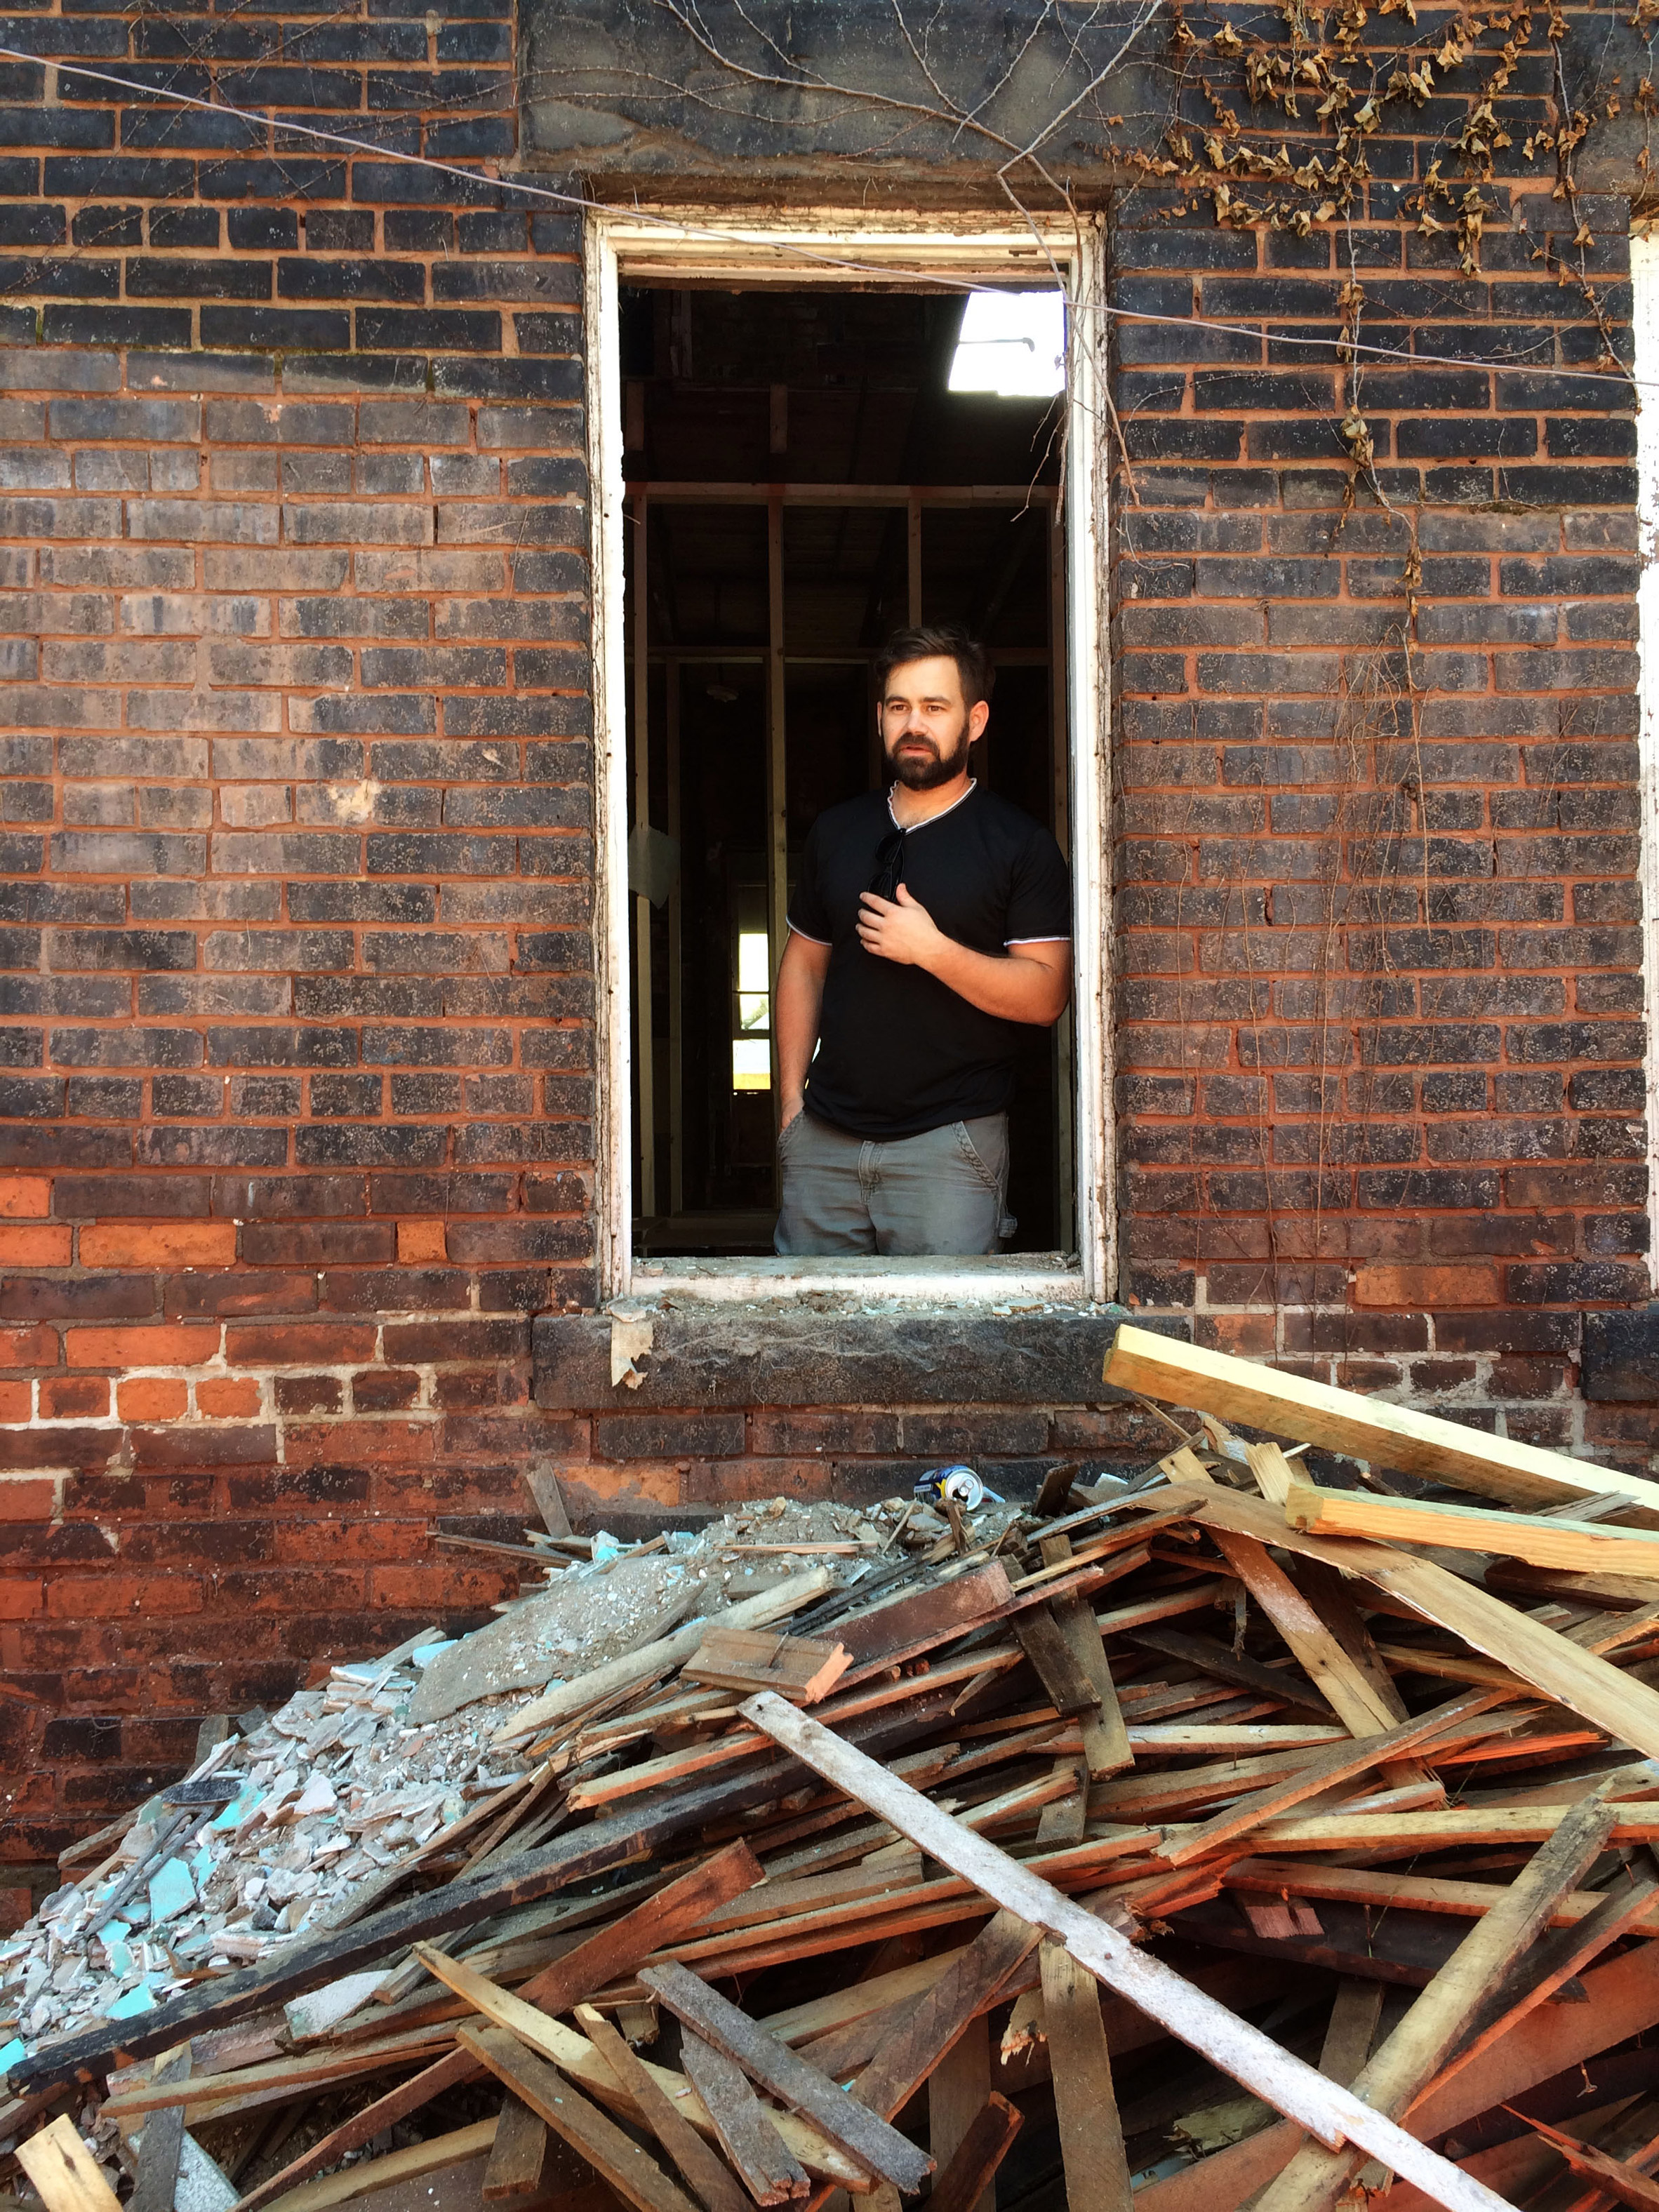 Cleveland firm Redhouse Architecture is planning to recycle derelict homes by combining waste materials from demolitions with mushroom mycelium, creating new building materials.